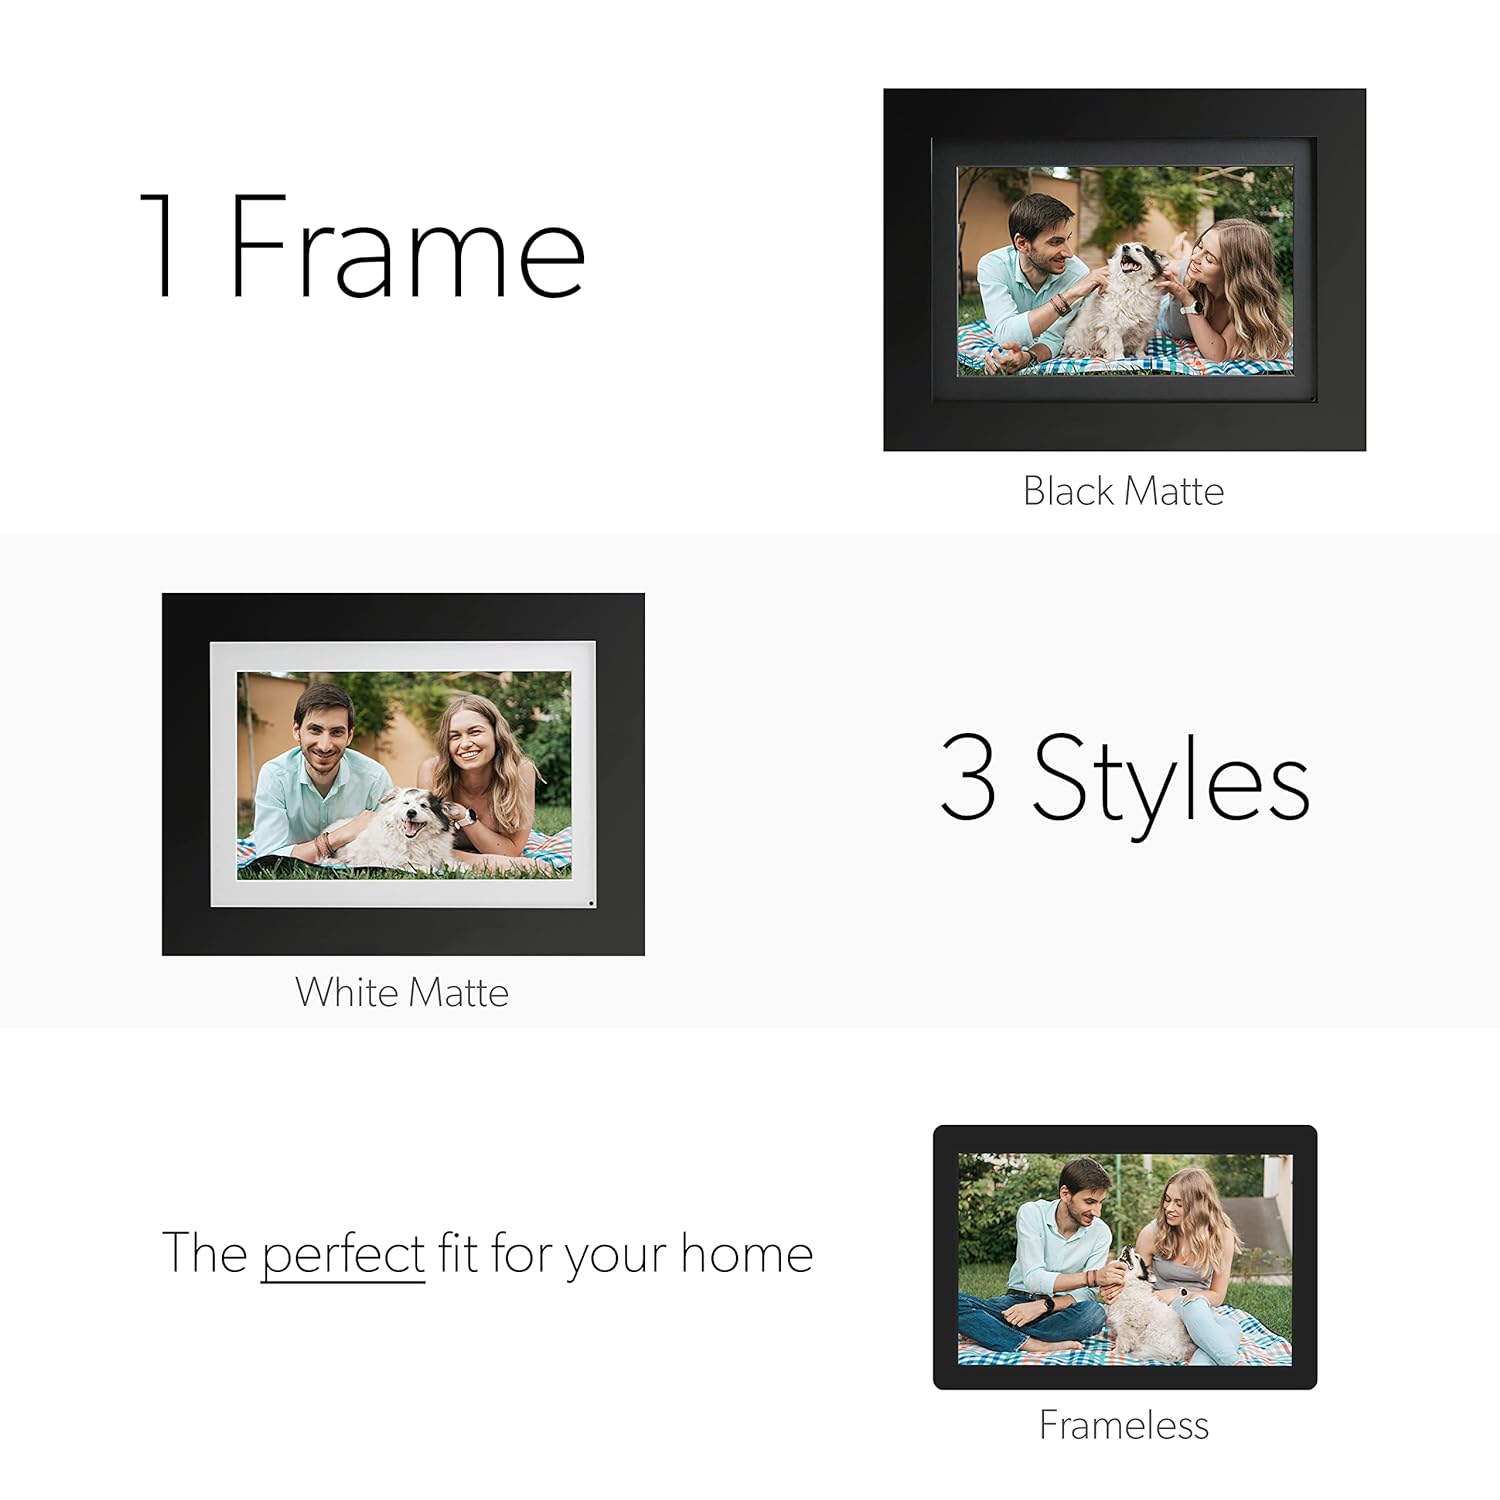 Brookstone PhotoShare 10” Smart Digital Picture Frame, Send Pics from Phone to Frames, WiFi, 8 GB, Holds 5,000+ Pics, HD Touchscreen, Premium Black Wood, Easy Setup, No Fees